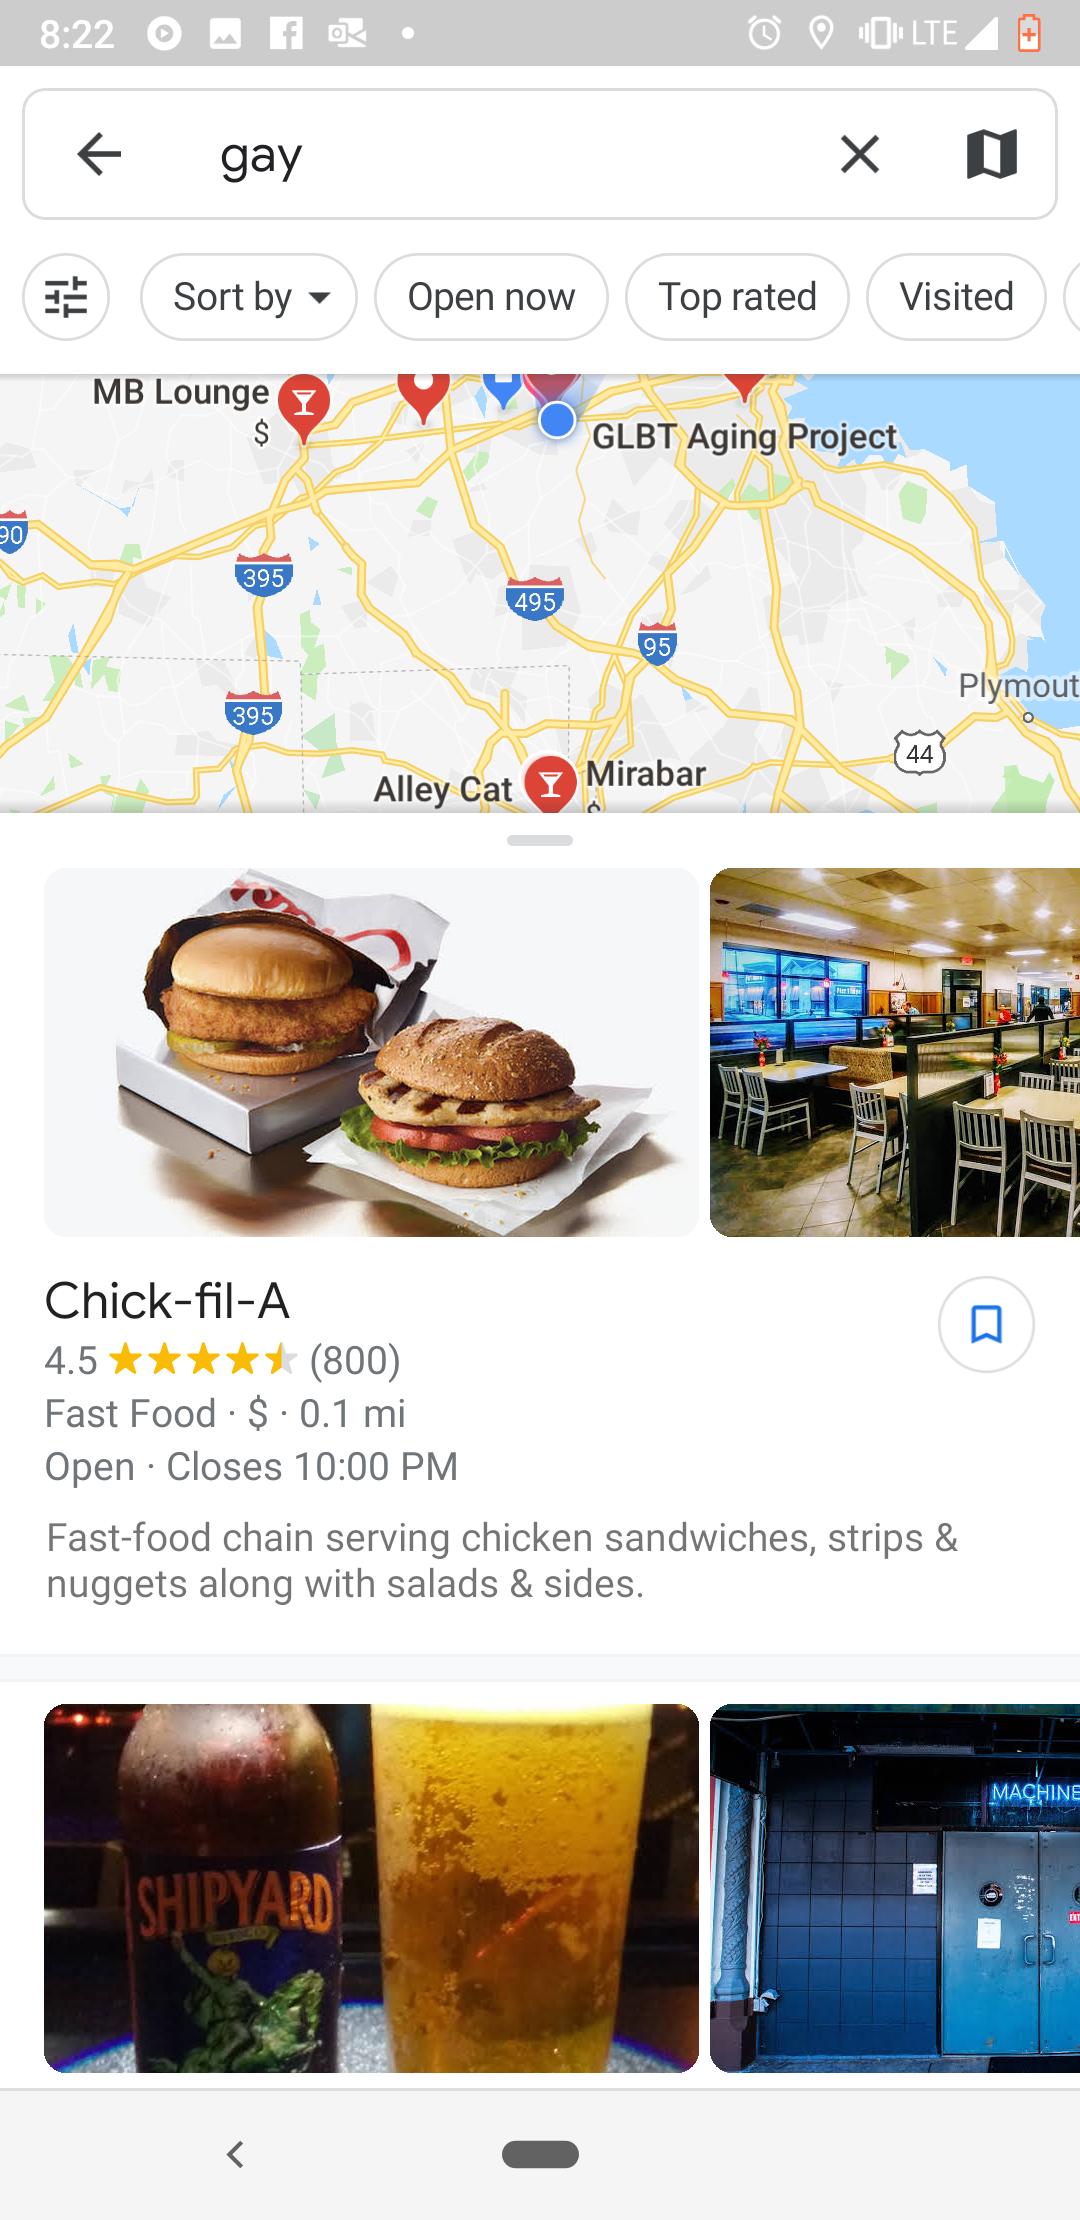 a search for 'gay' which came out with chick fil a